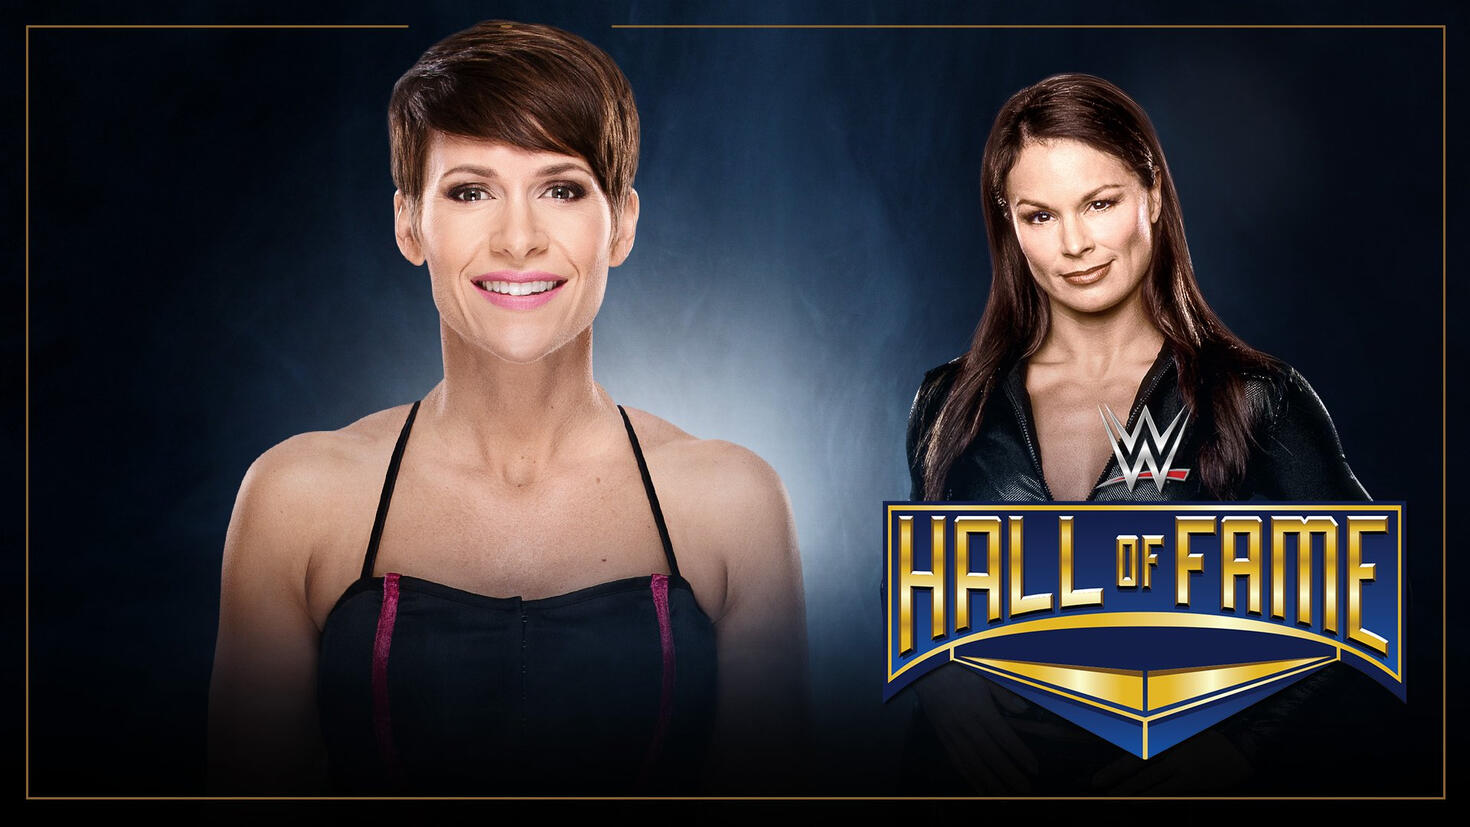 Wwe Hall Of Fame 2018 Who Is Being Inducted And Who Is Inducting Who